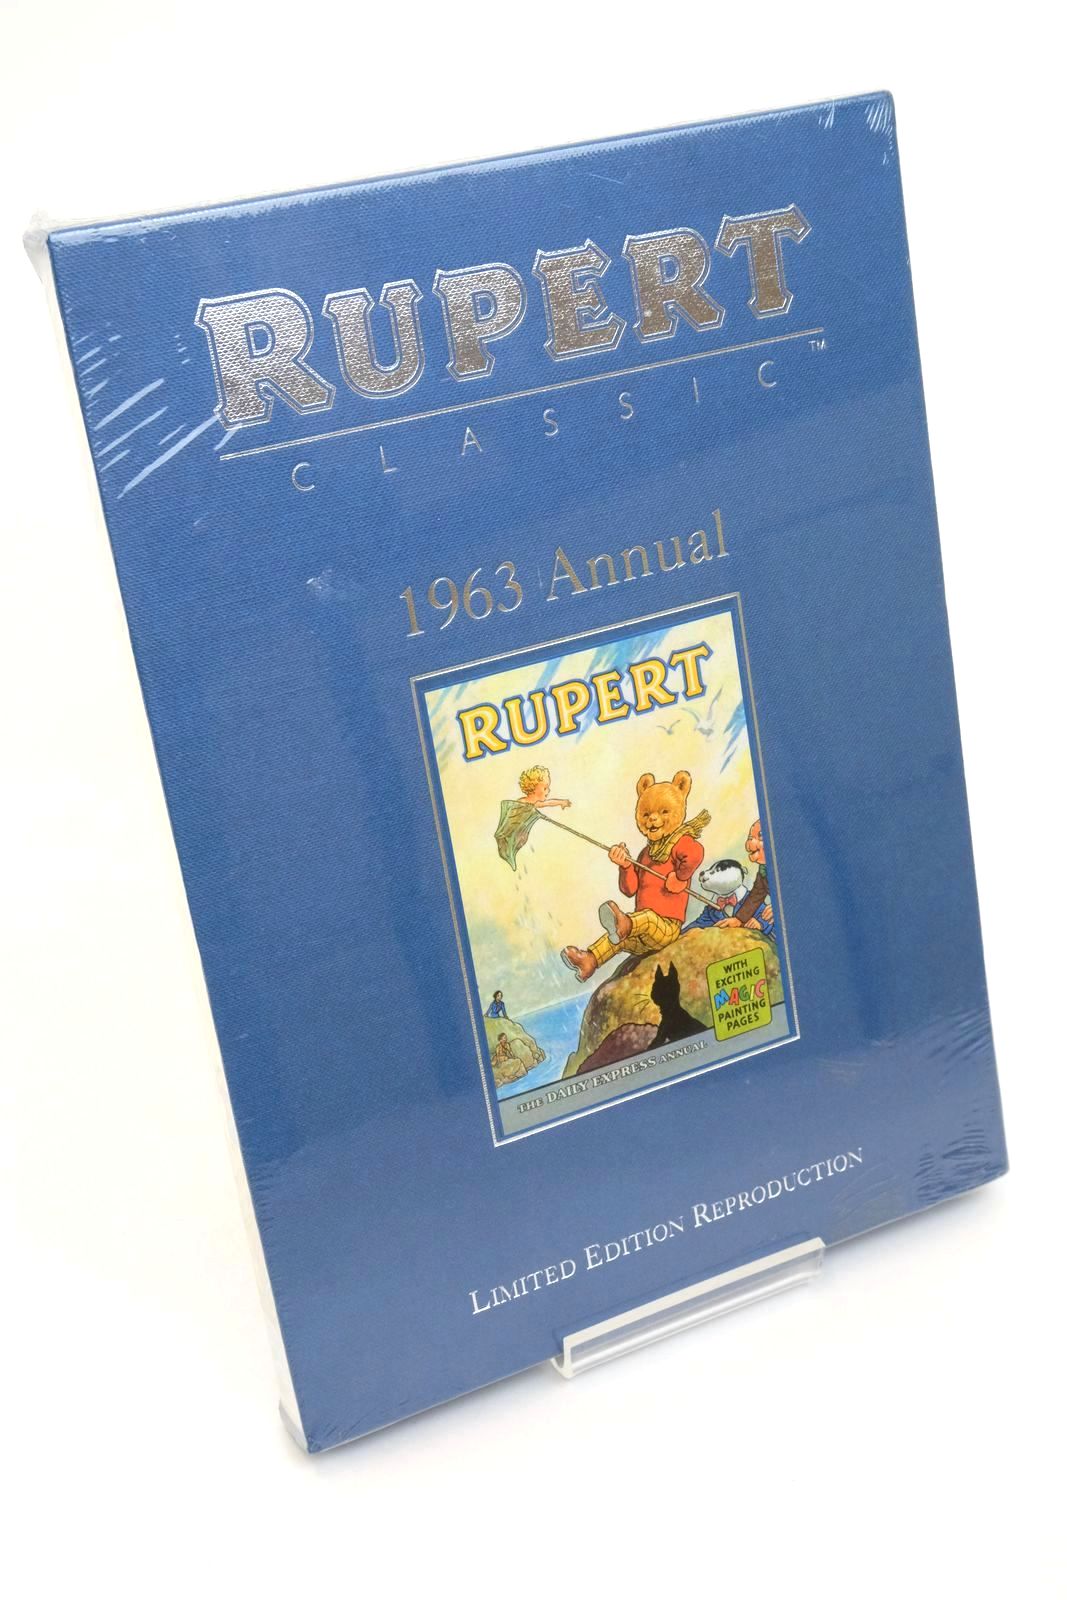 Photo of RUPERT ANNUAL 1963 (FACSIMILE) written by Bestall, Alfred illustrated by Bestall, Alfred published by Egmont Children's Books Ltd. (STOCK CODE: 1322859)  for sale by Stella & Rose's Books